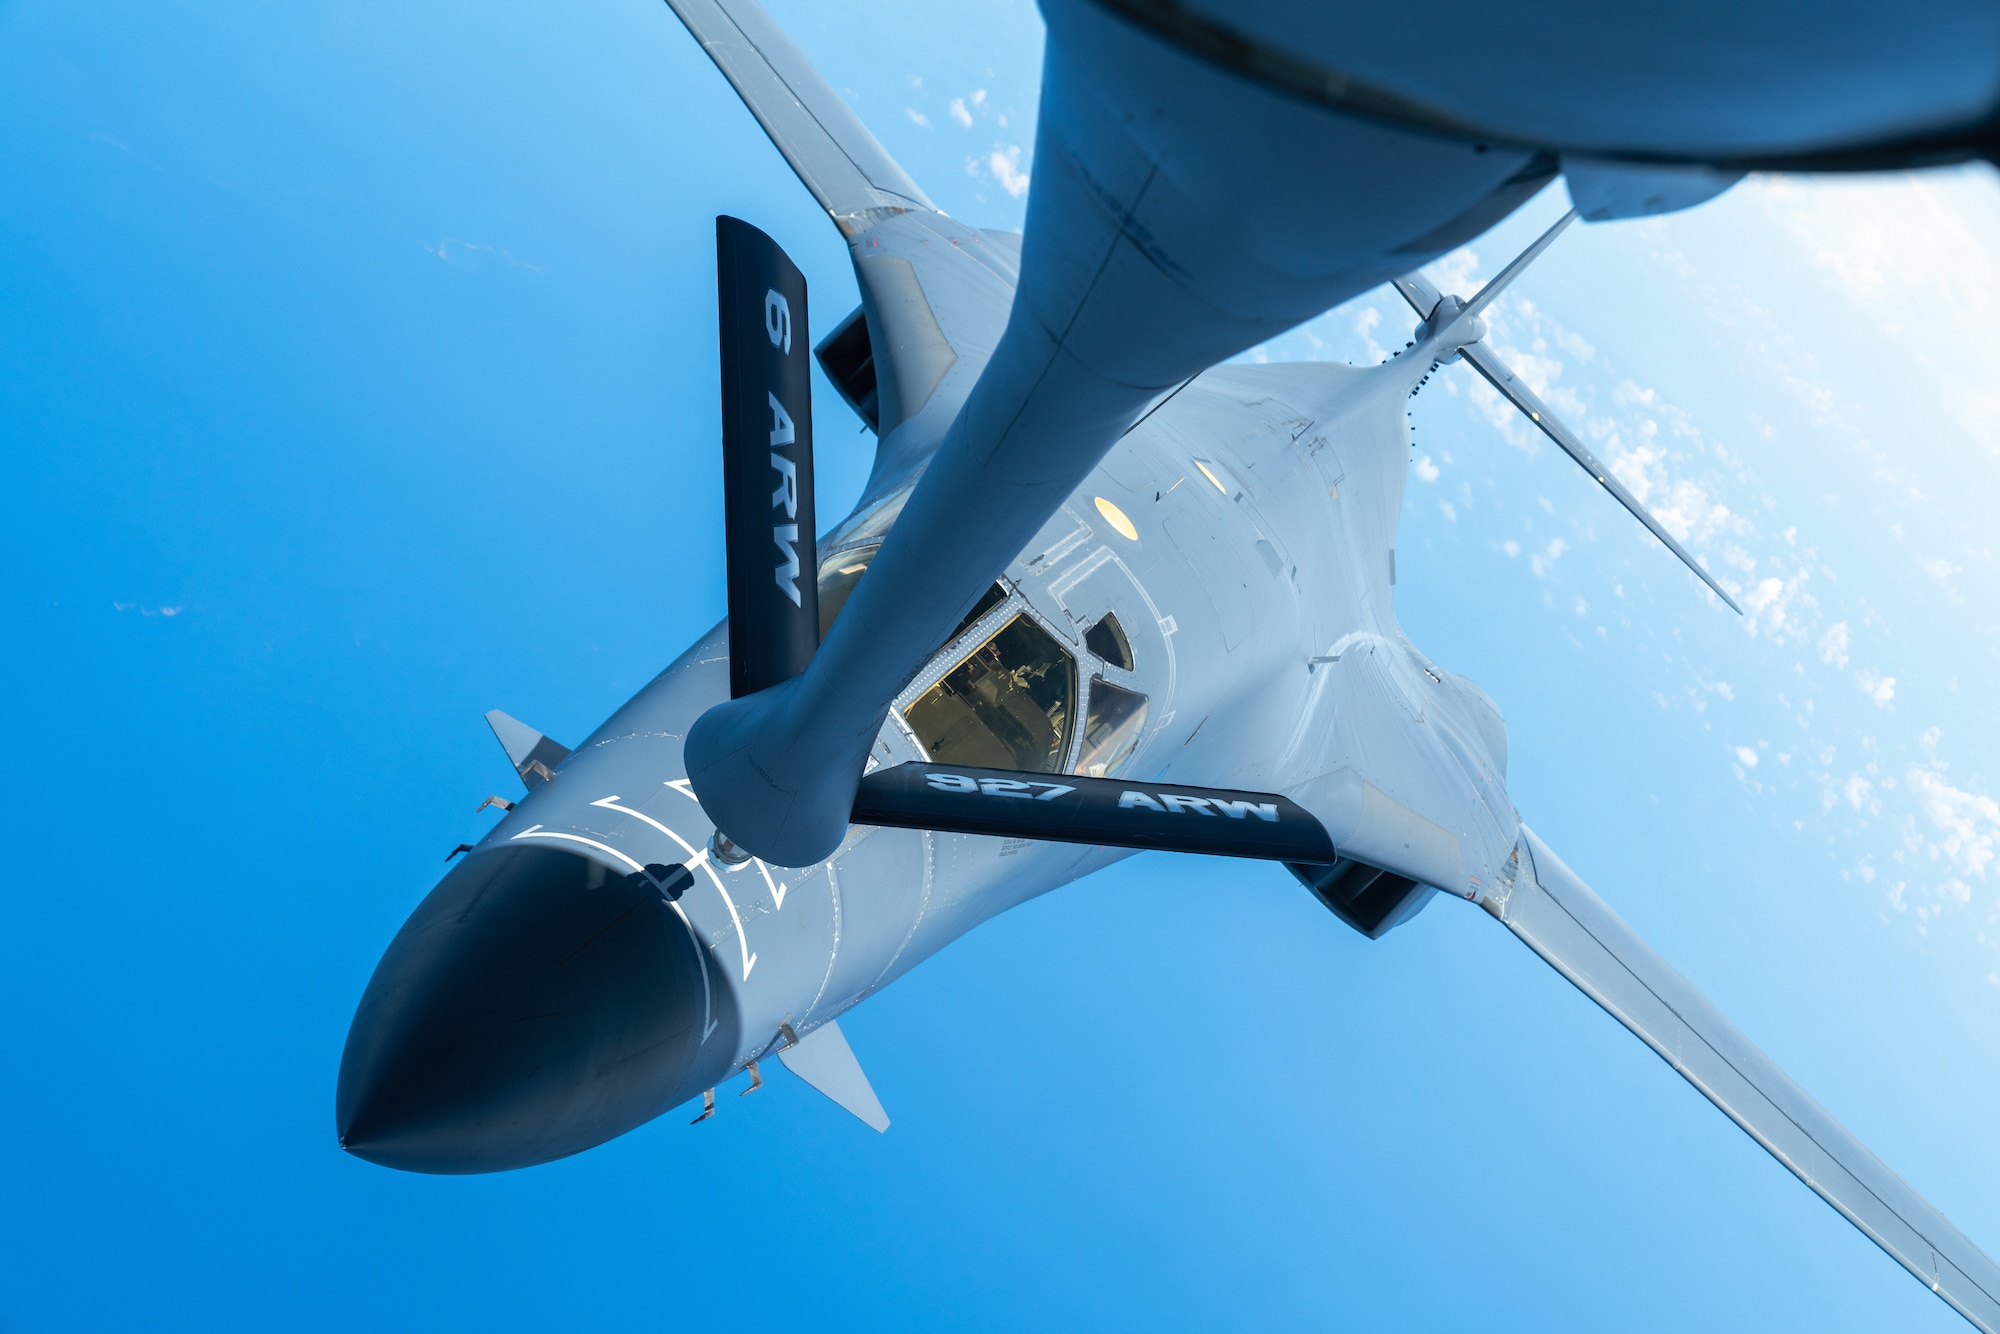 A B-1B Lancer aircraft assigned to the 7th Bomb Wing, Dyess Air Force Base, Texas, receives fuel from a KC-135 Stratotanker aircraft assigned to the 927th Air Refueling Wing, MacDill AFB, Florida, over the Caribbean Sea, Sept. 7, 2022. The air operations between 12th Air Force and Air Mobility Command were part of a Partner Interoperability Training exercise with Panama and Ecuador to grow capacity, enhance the ability to respond to illegal fishing practices and maintain shared interest in regional security. Multilateral engagements such as this one ensures maximum resource efficiency and enable the consistent training between U.S. Southern Command, component command and partner nations. (U.S. Air Force photo by Airman 1st Class Joshua Hastings)